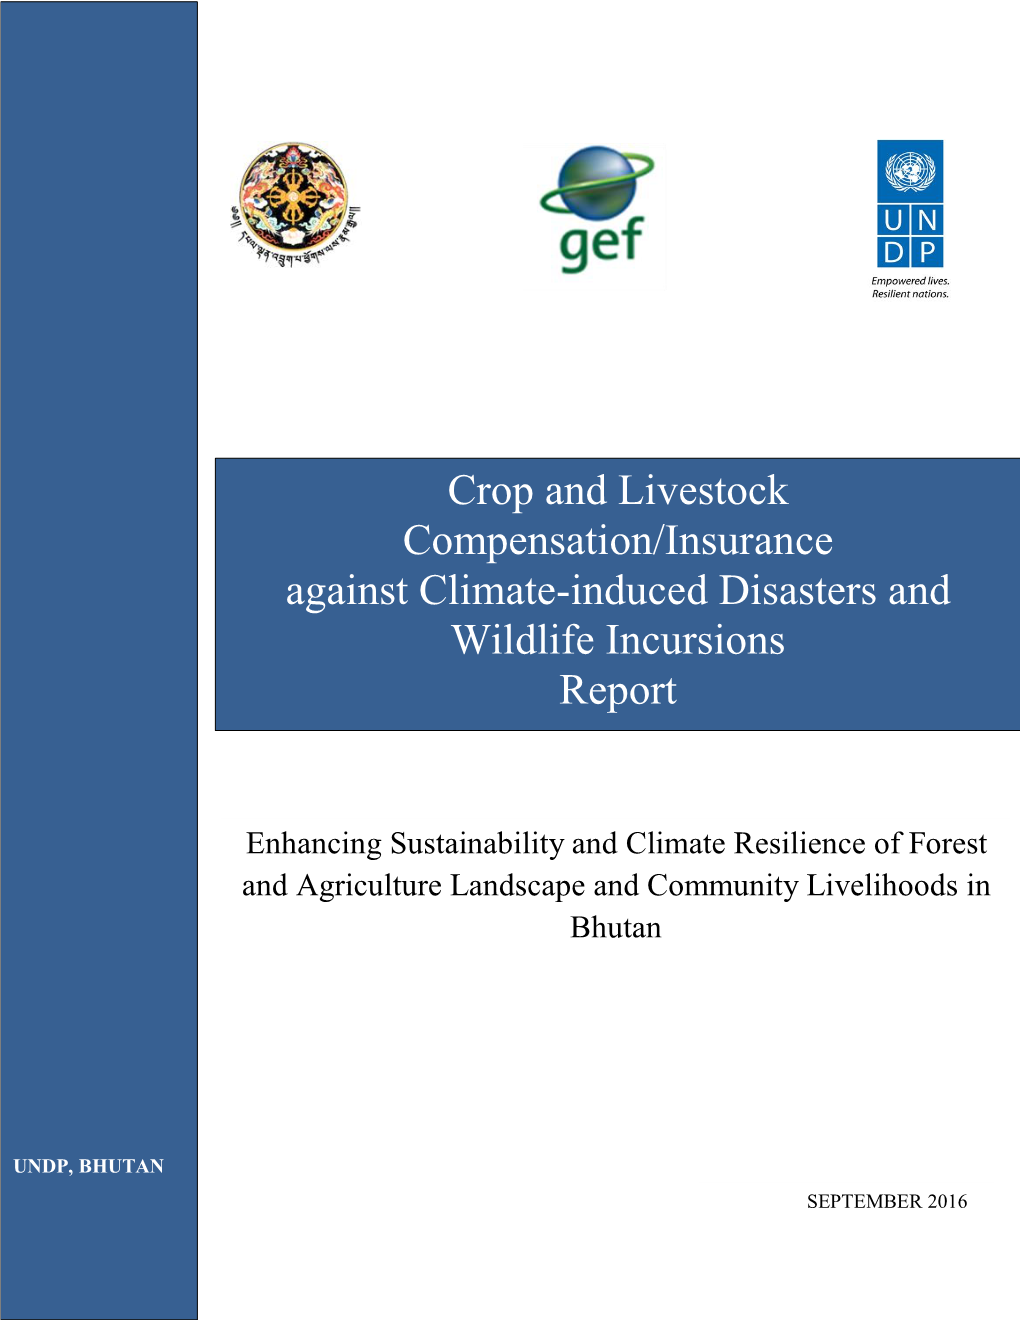 Crop and Livestock Compensation/Insurance Against